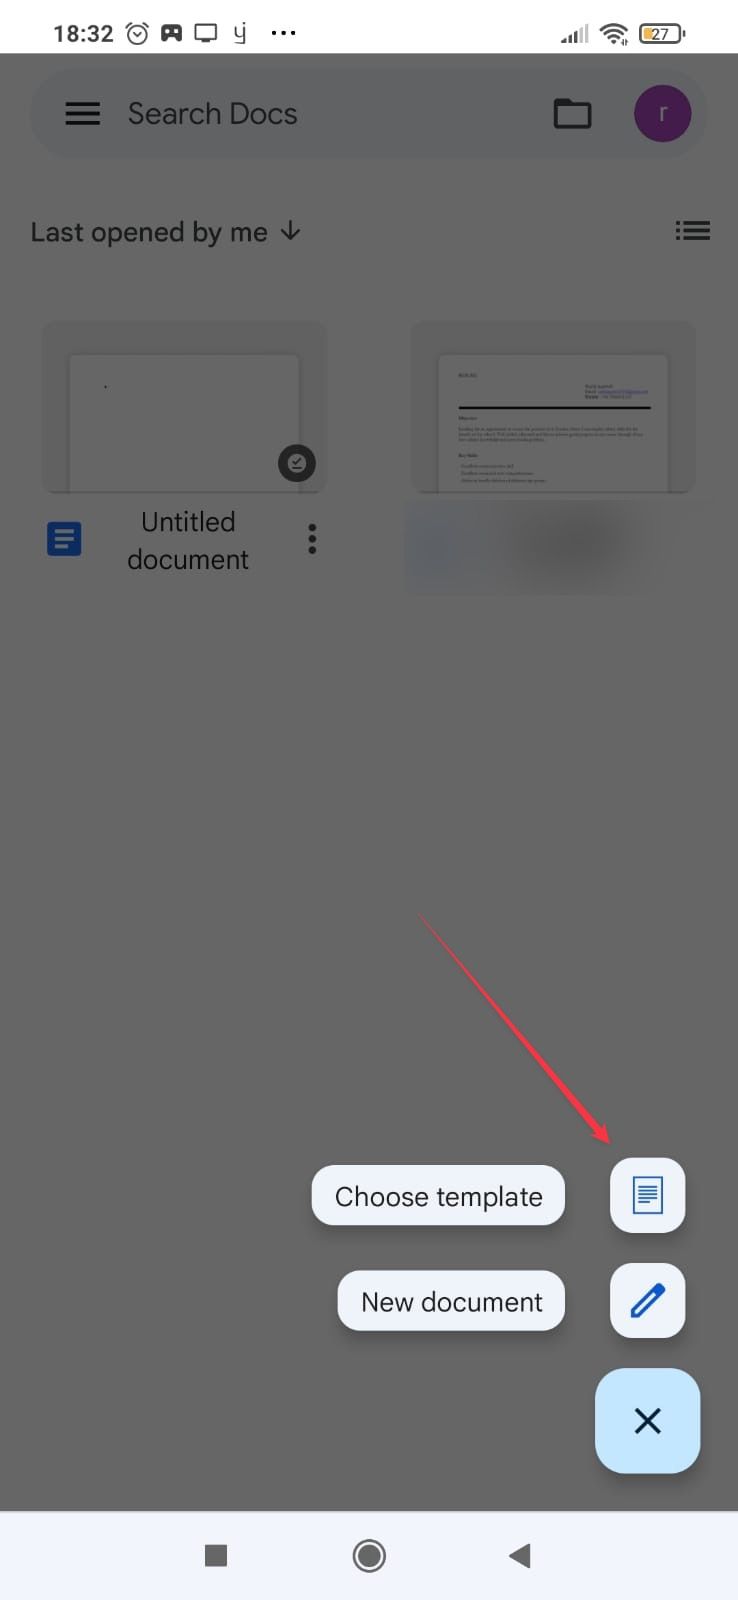 Google Docs Android app showing Choose template button